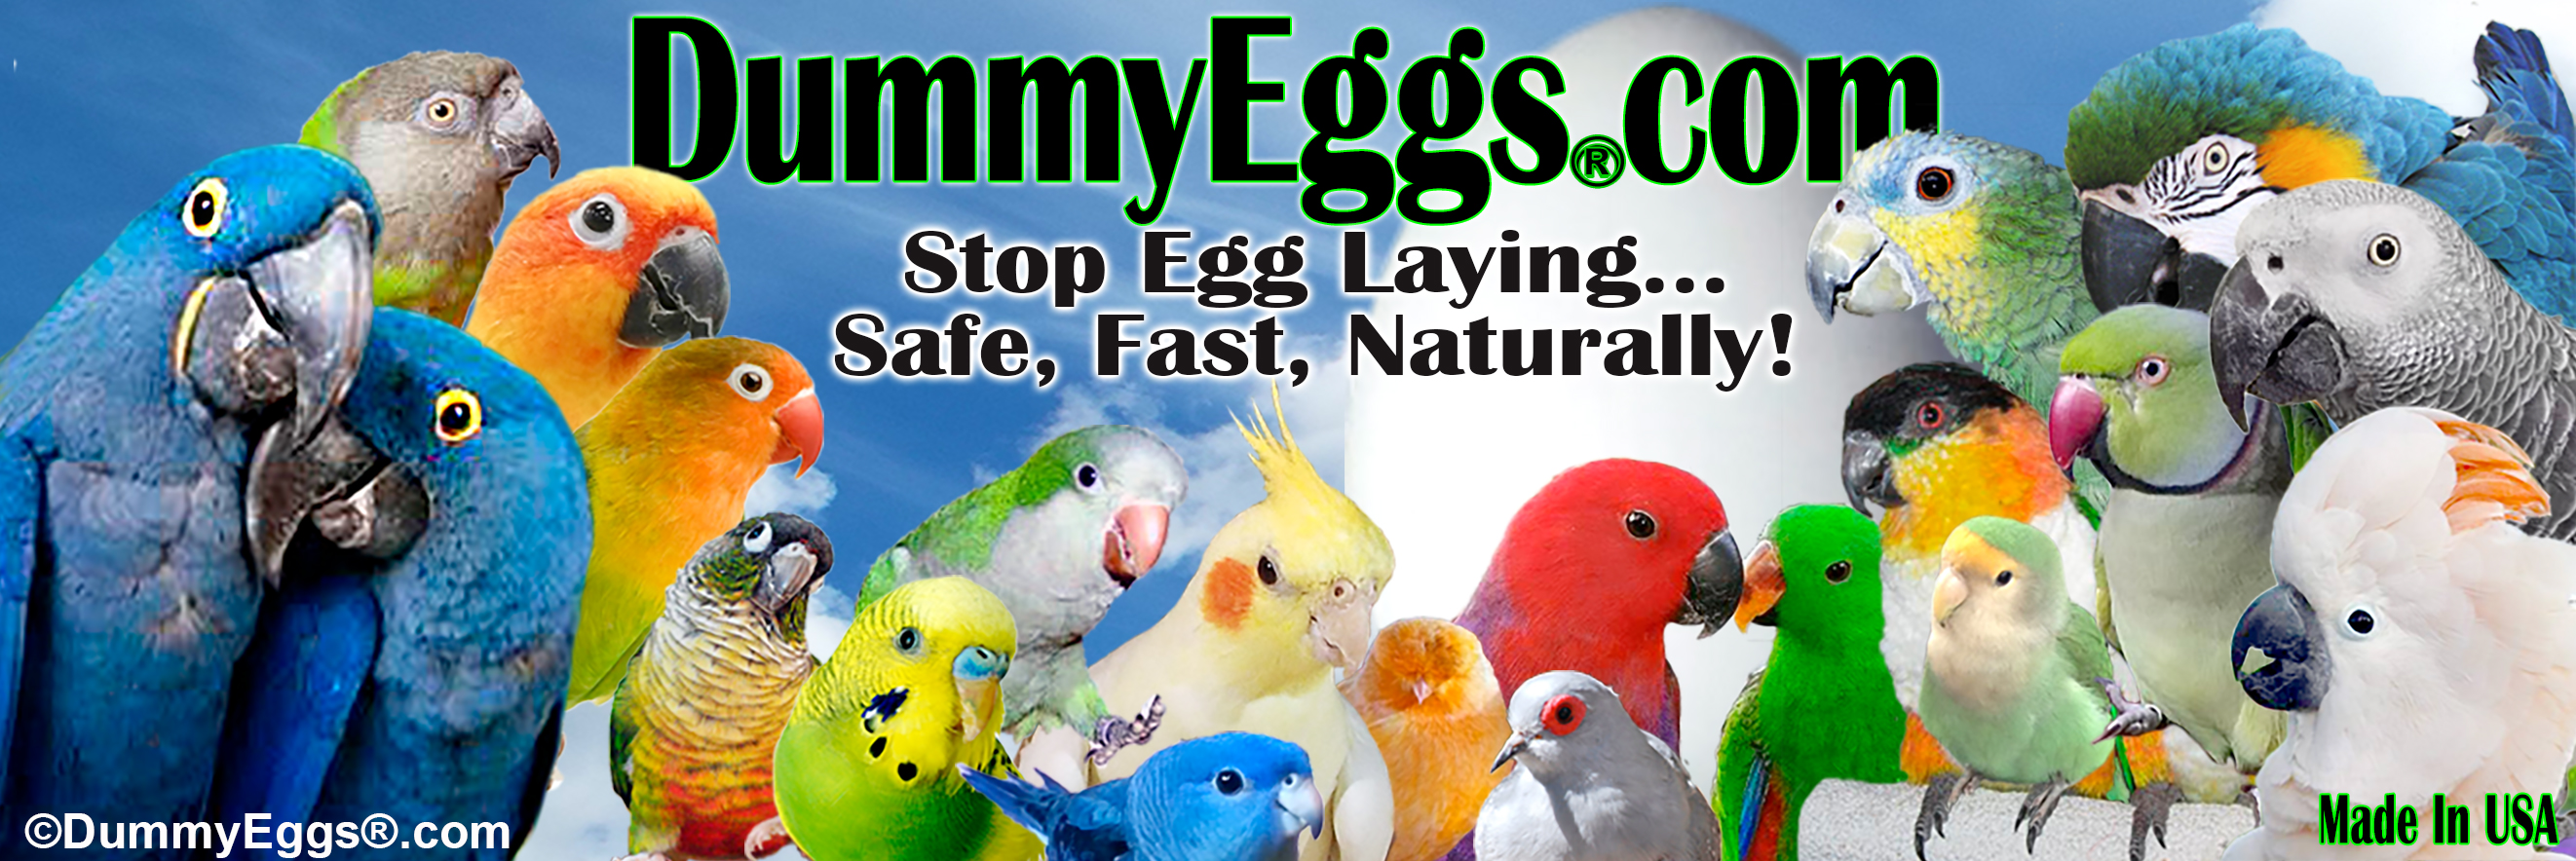 DummyEggs.com heading collage of all pet birds with blue sky backaground